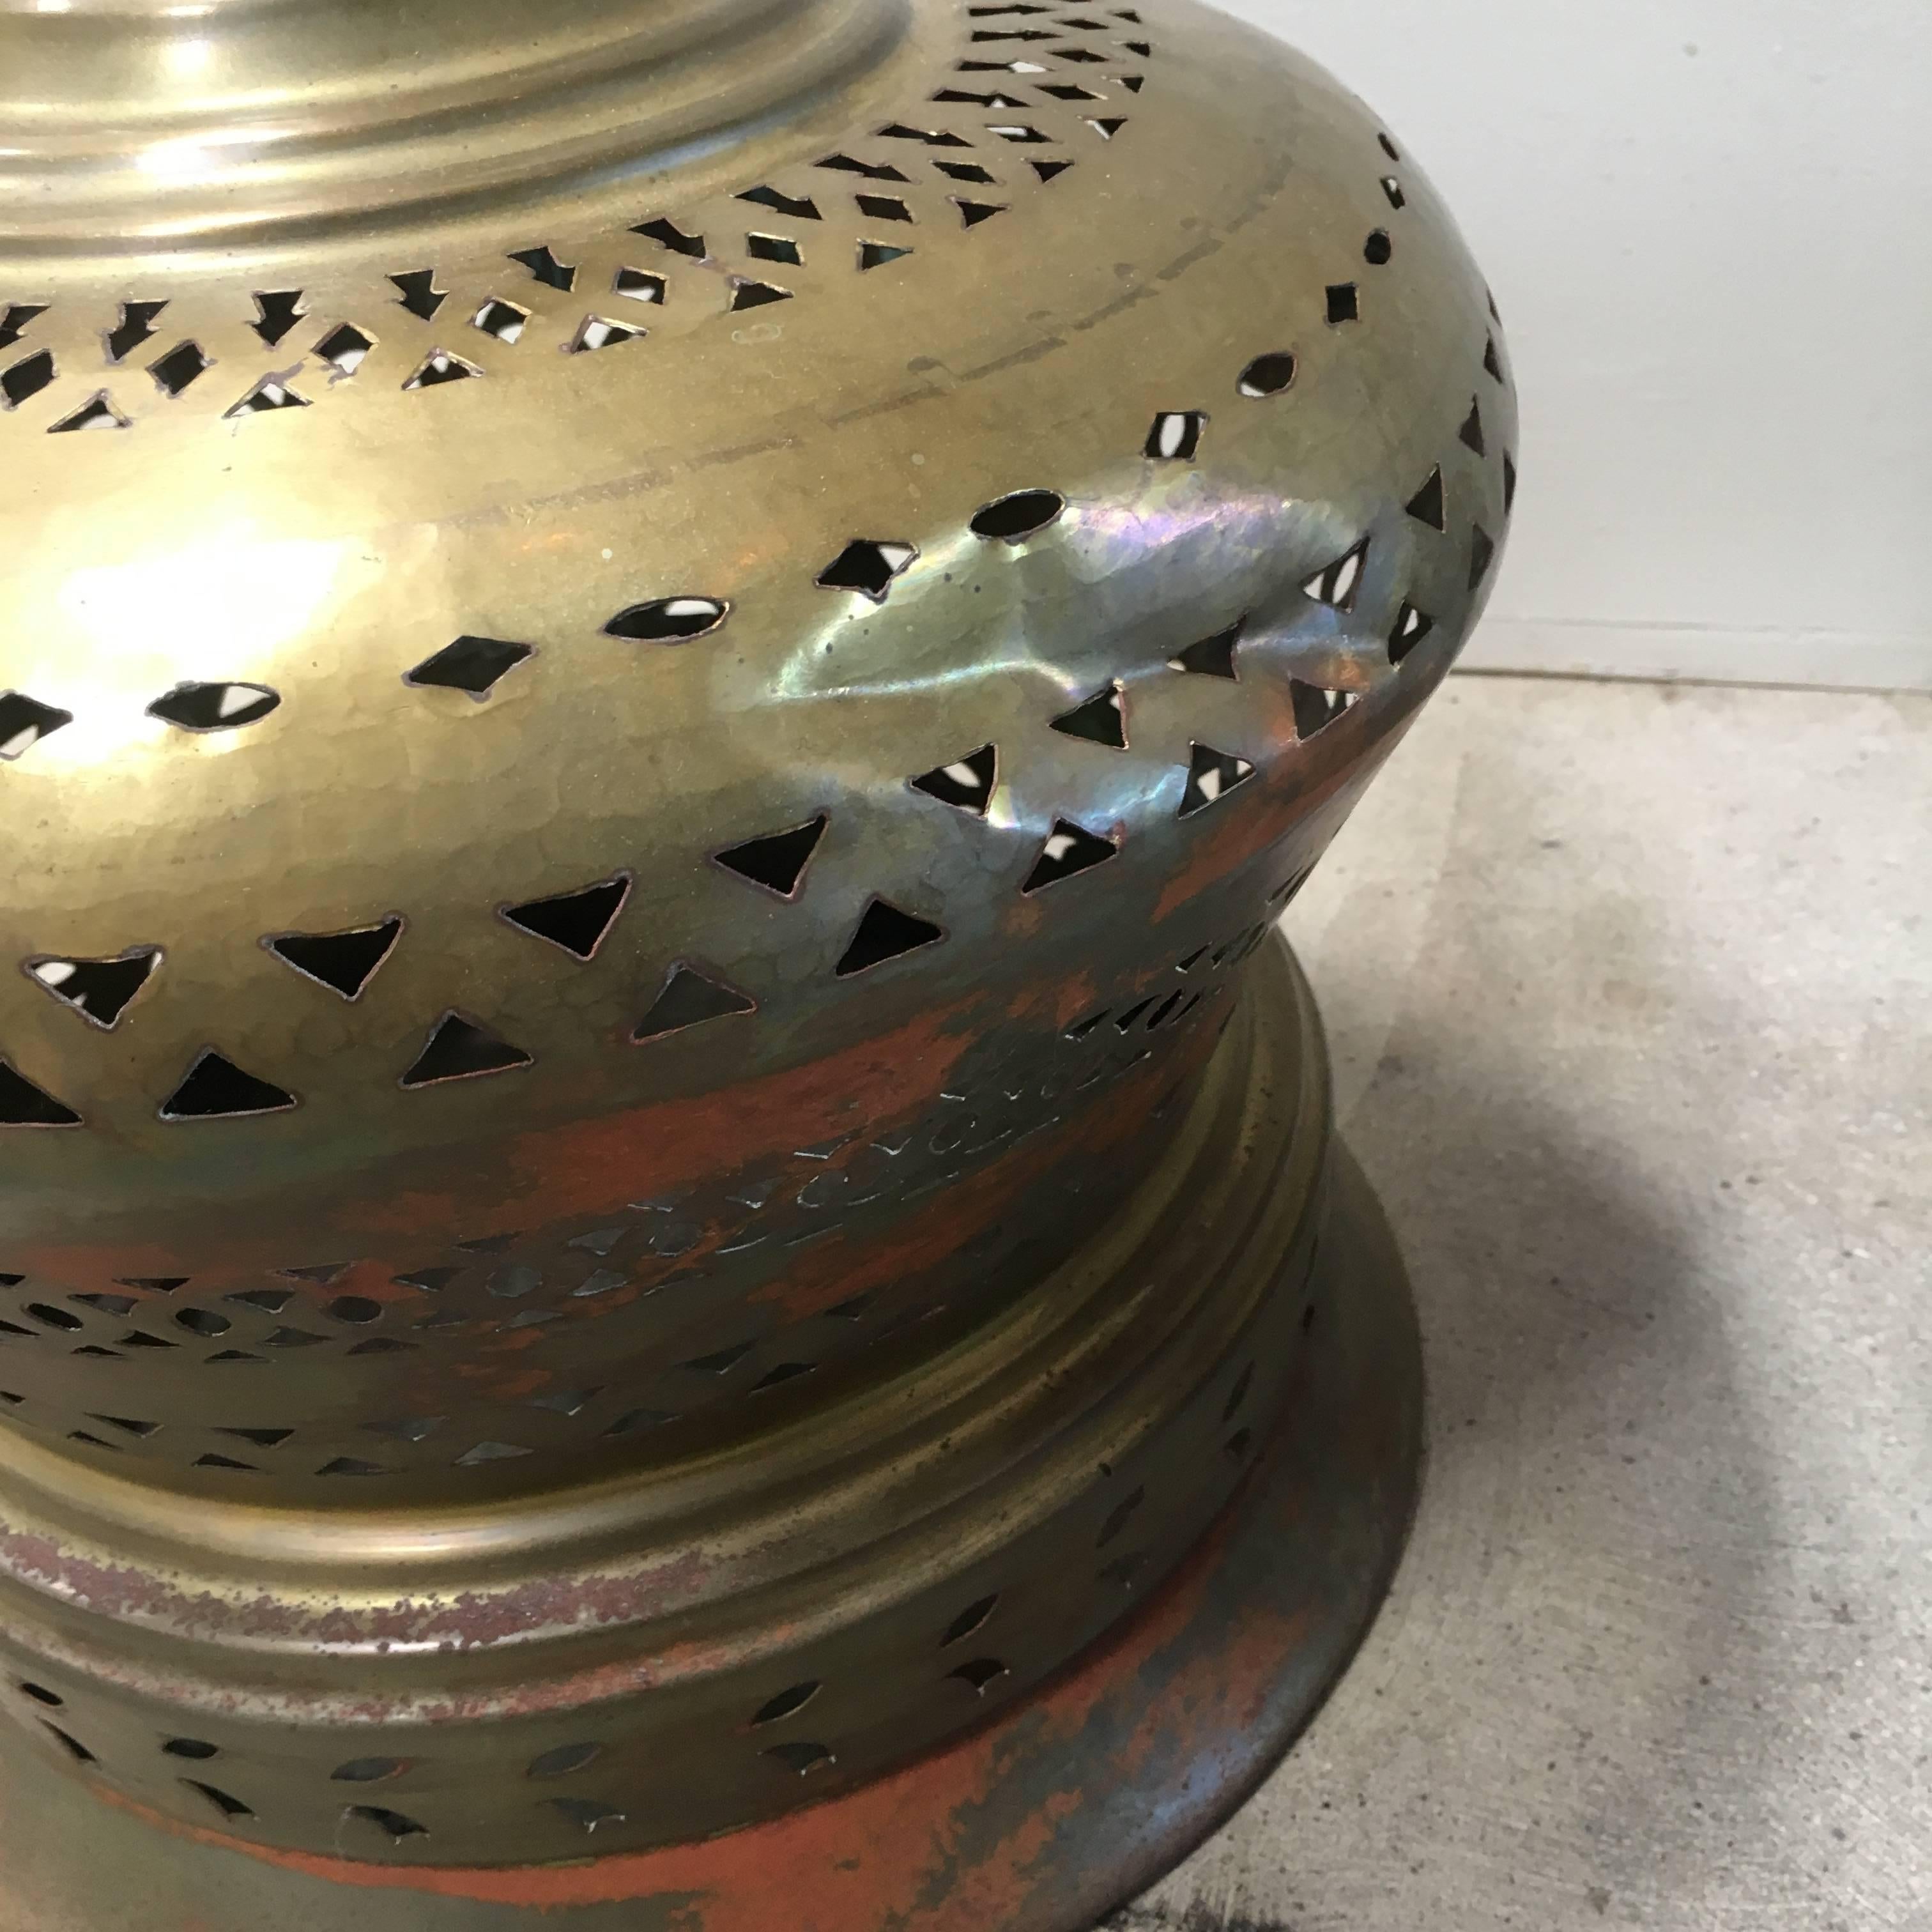 Vintage Moroccan brazier, an item used for cooking tagine. Sculptural brass has intricately decorated with stamped designs, with a ornamental finial. Interior dish is copper.